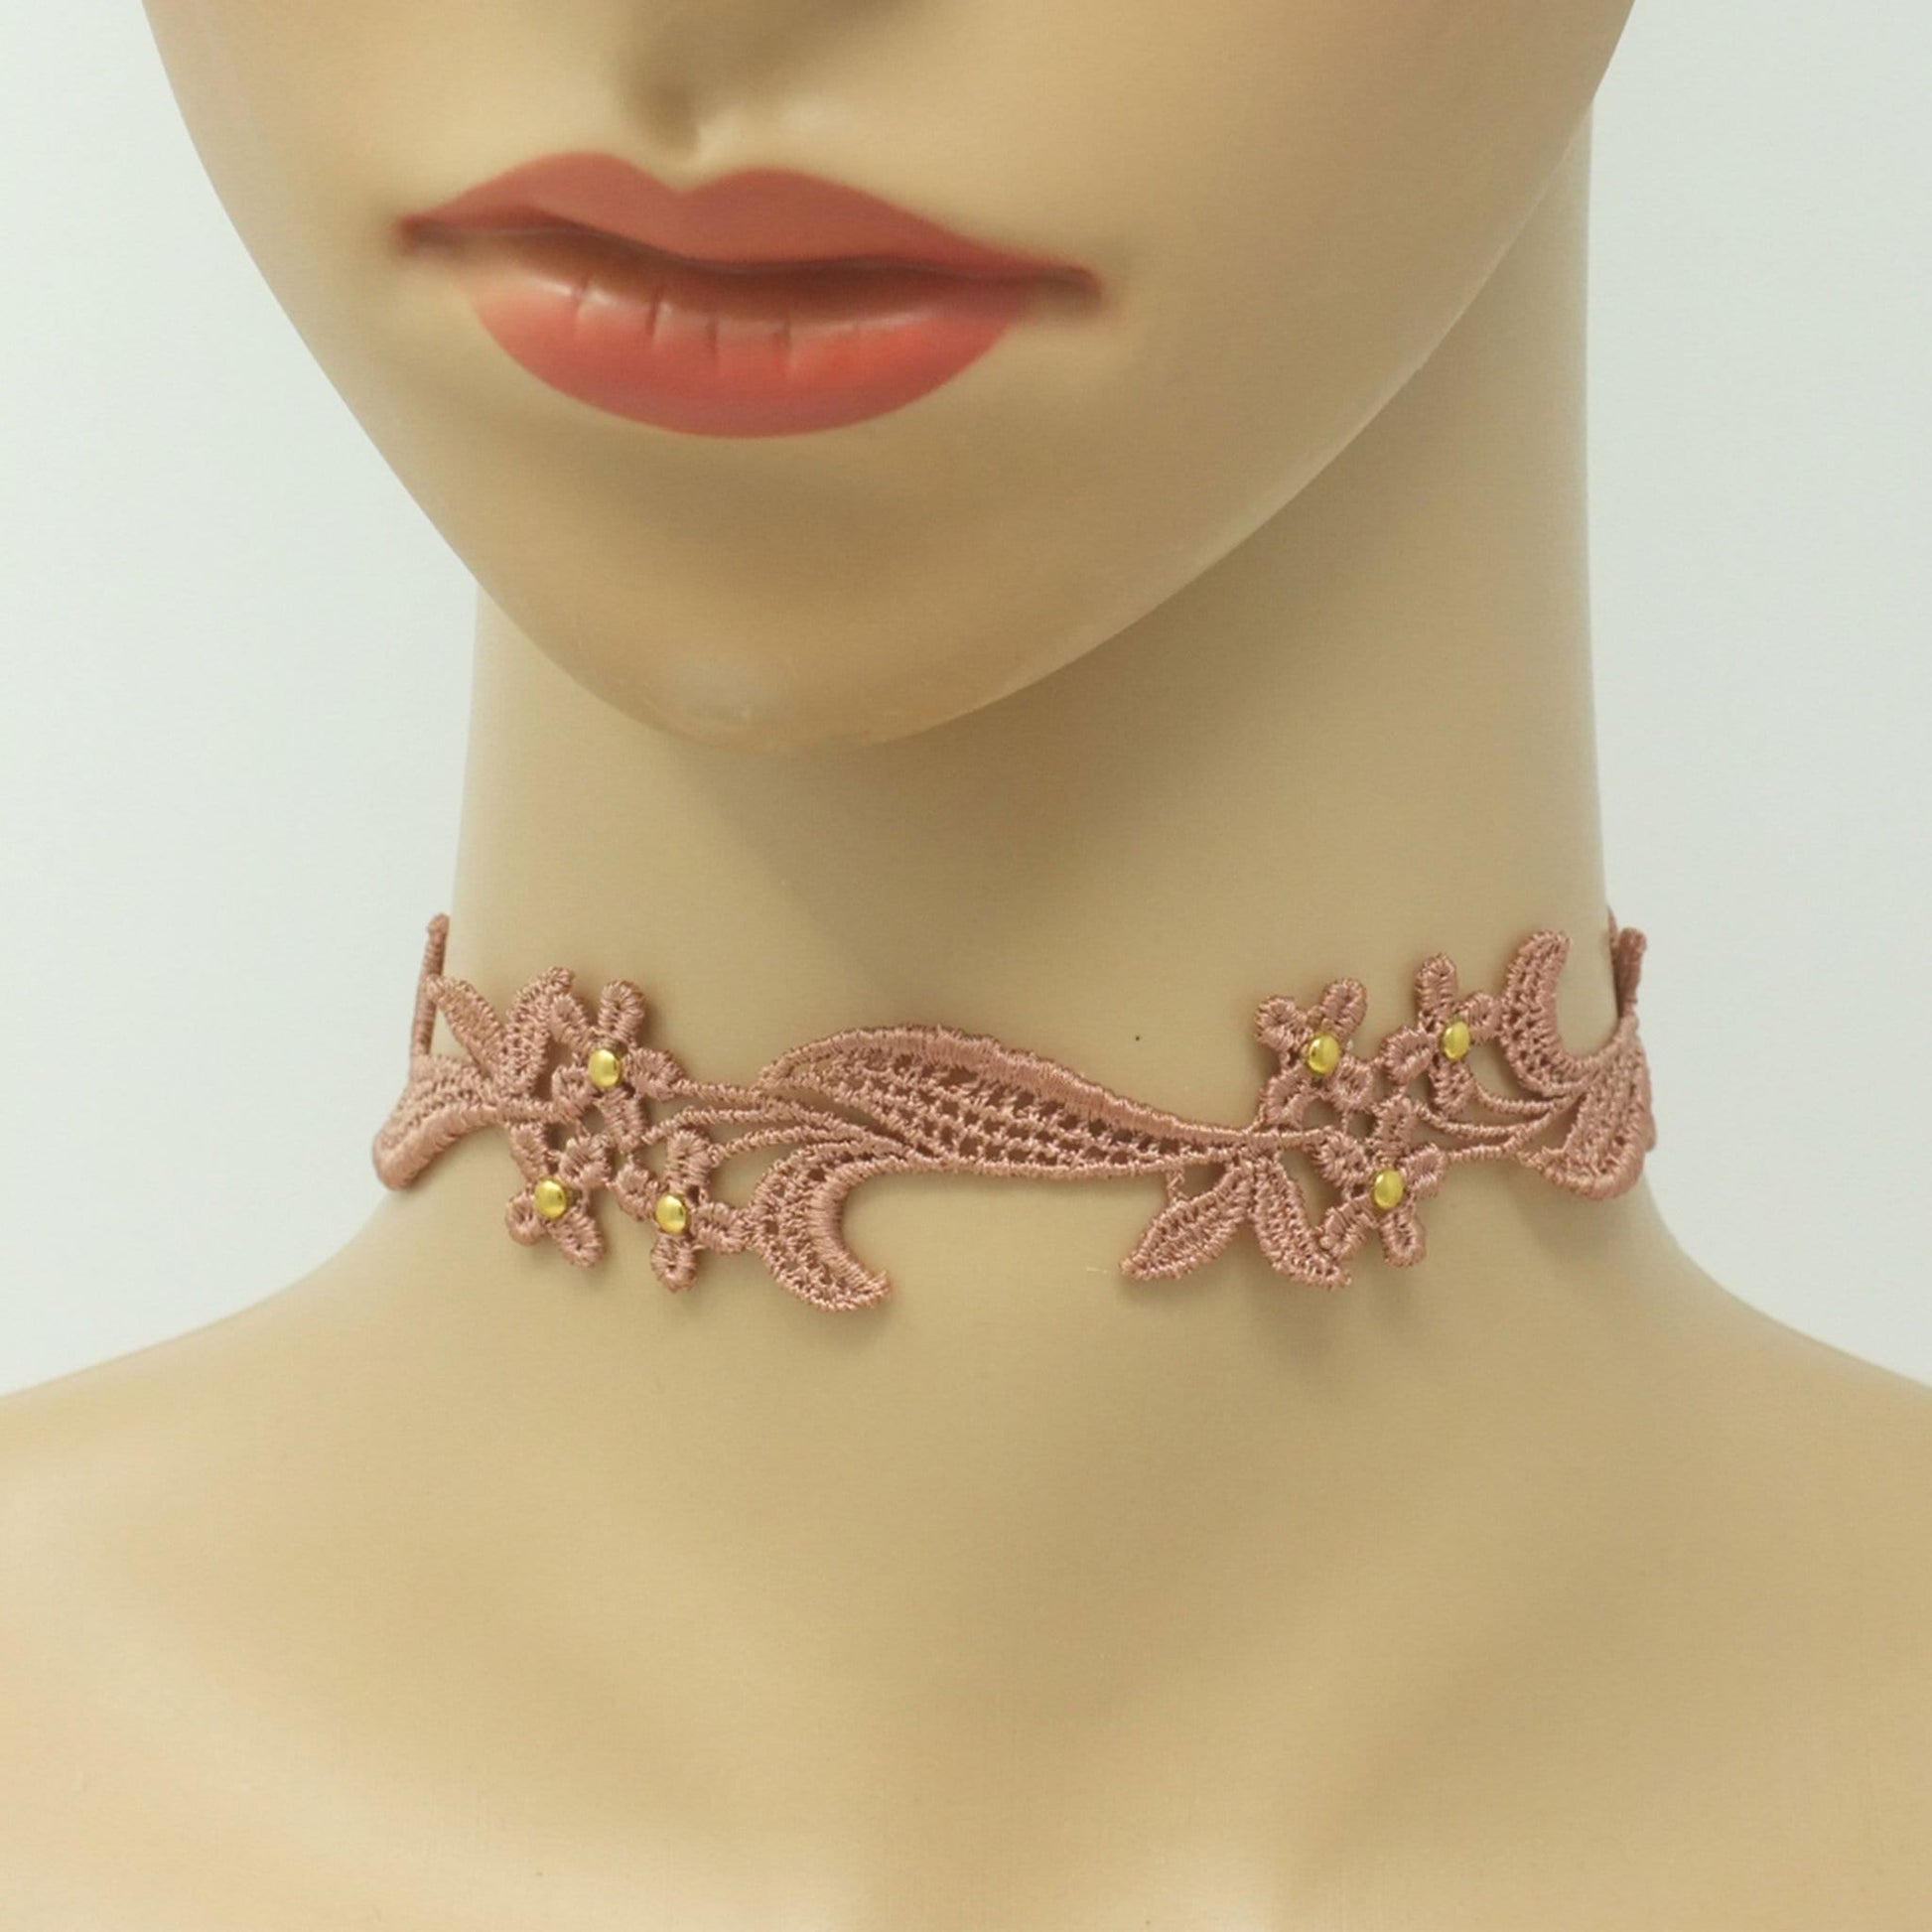 Beige Lace Choker Necklace decorated with Gold Brass Beads